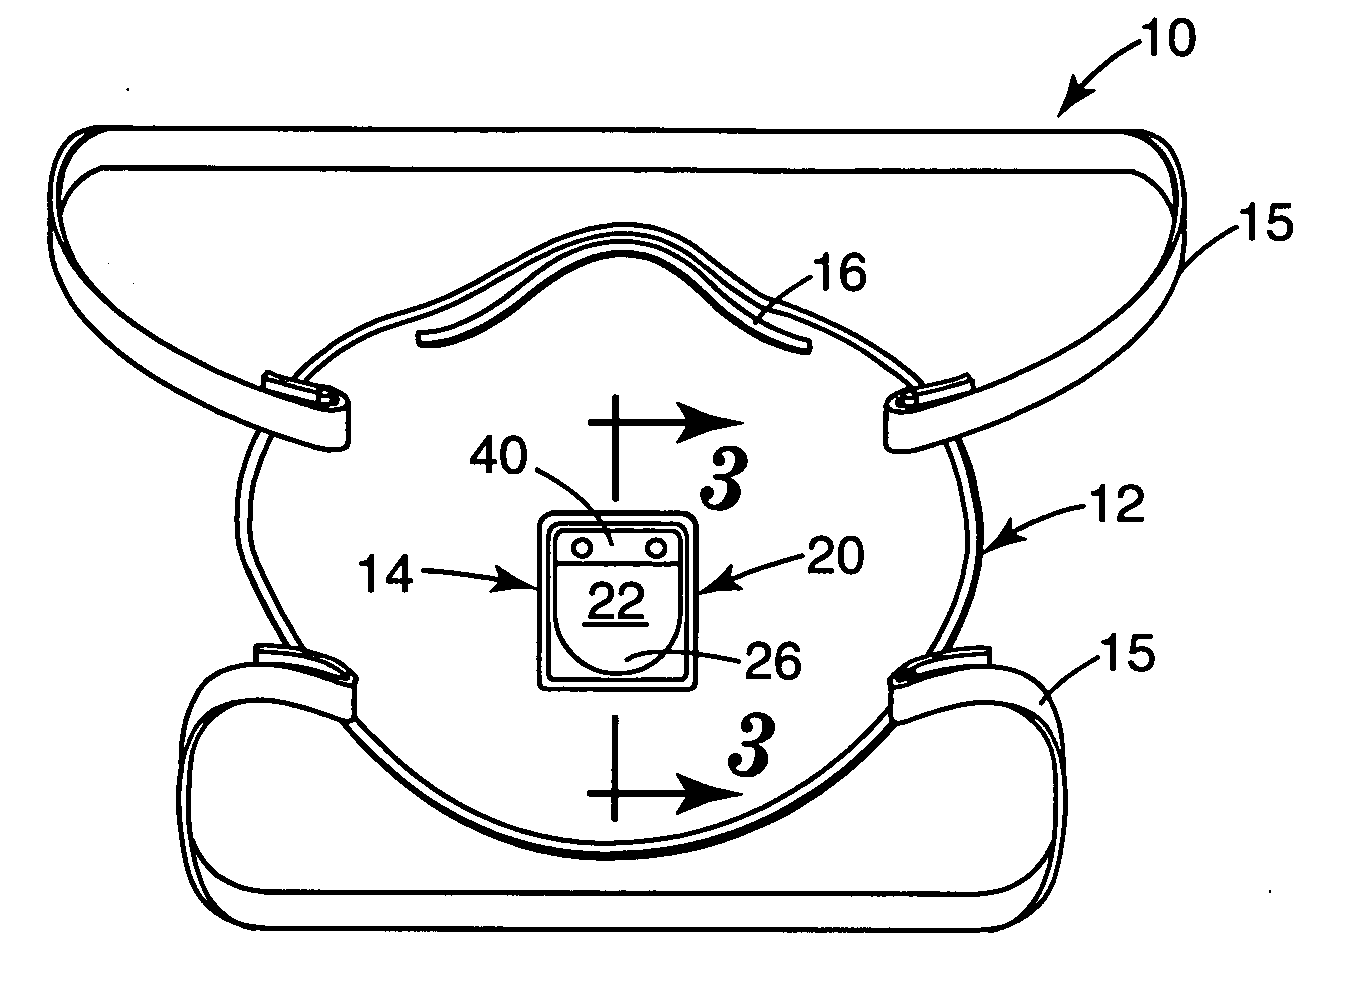 Exhalation and inhalation valves that have a multi-layered flexible flap